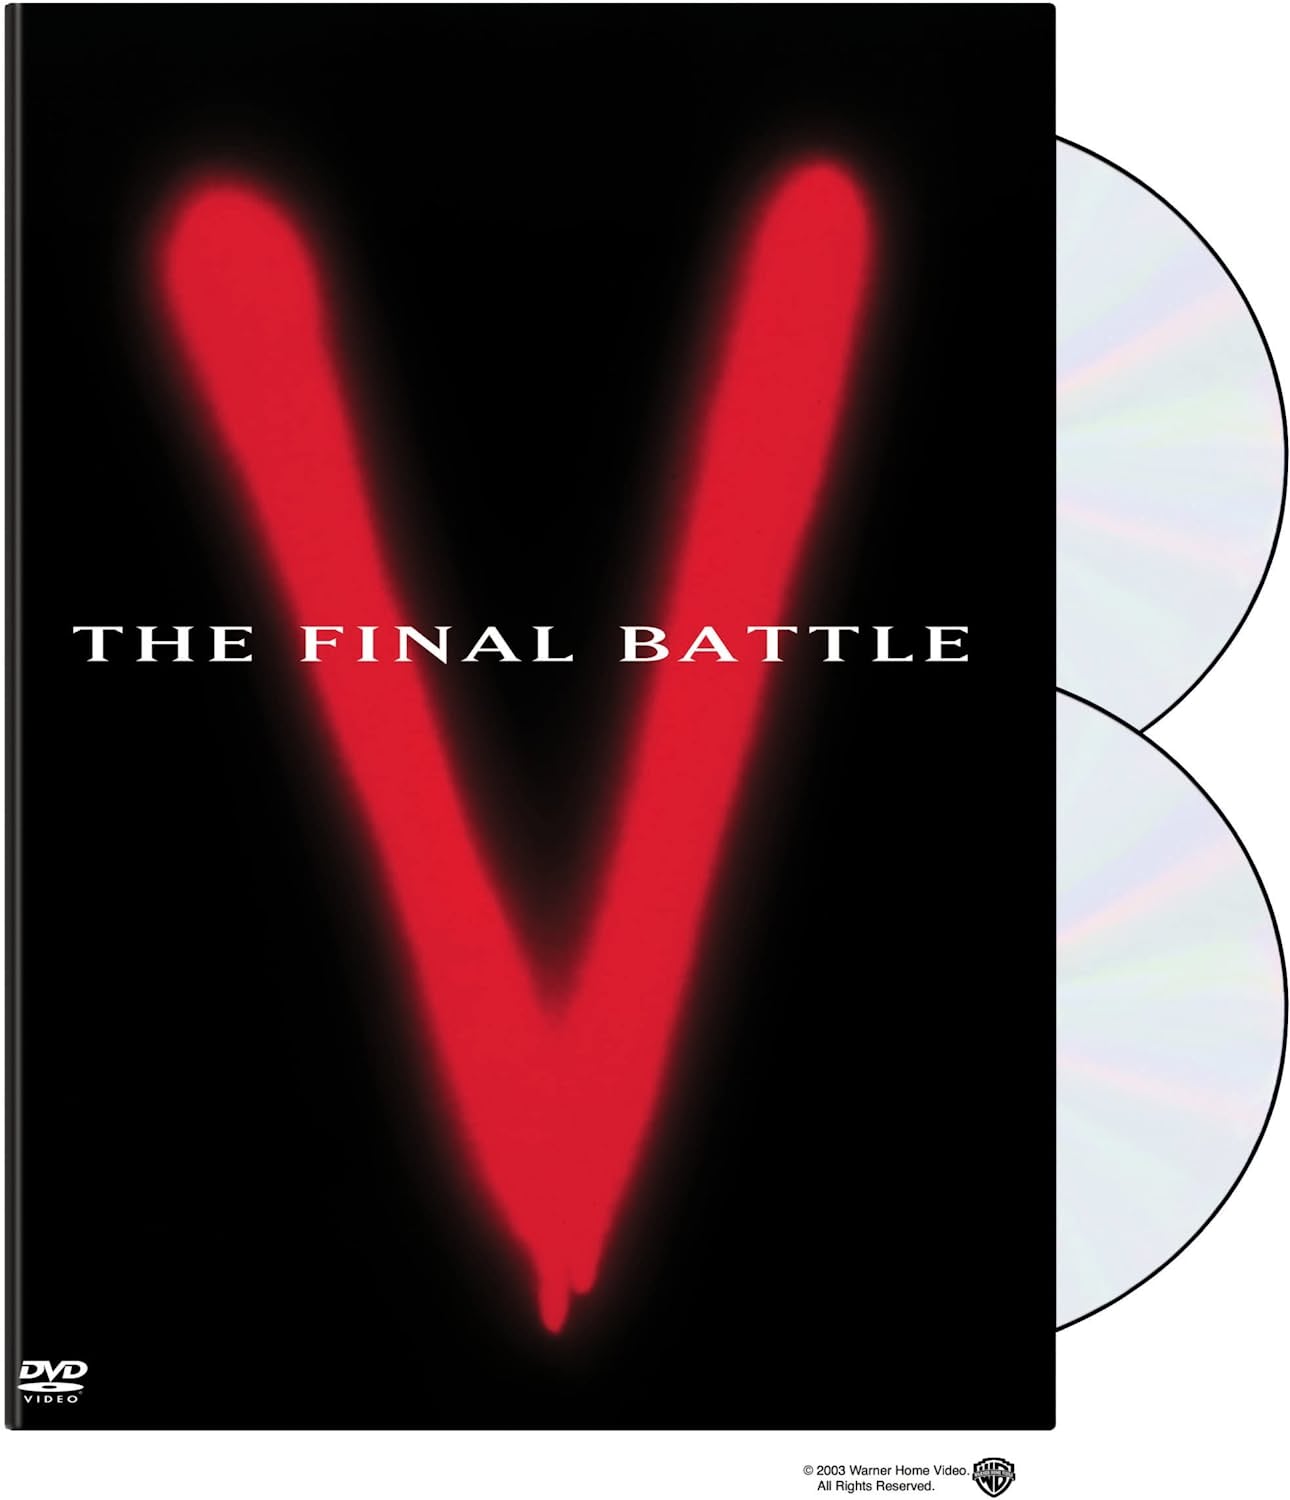 V - The Final Battle - DVD [ 1984 ]  - Sci Fi Television On DVD - TV Shows On GRUV